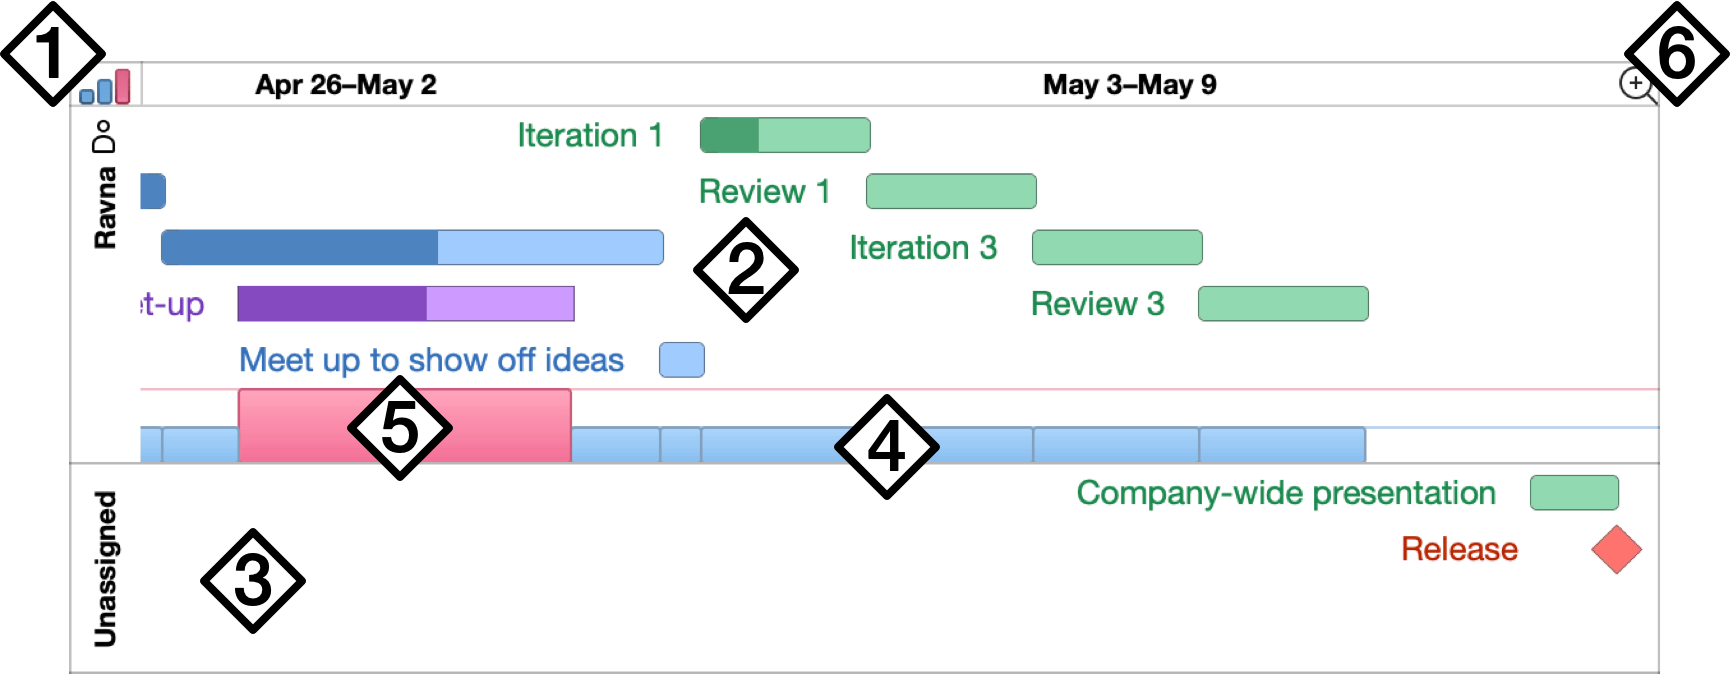 An overview of resources in the resource timeline.